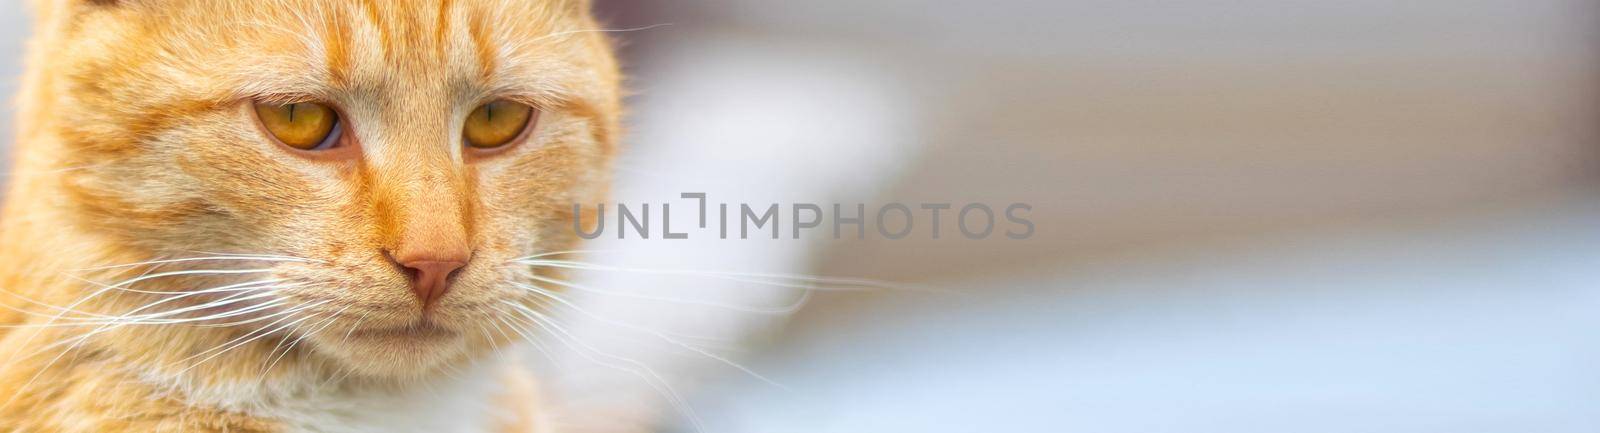 Portrait of a red cat on a blurred background. Red cat face. The concept of animals and pets. Orange tabby cat. Front view. Banner with copy space for website. by Roshchyn